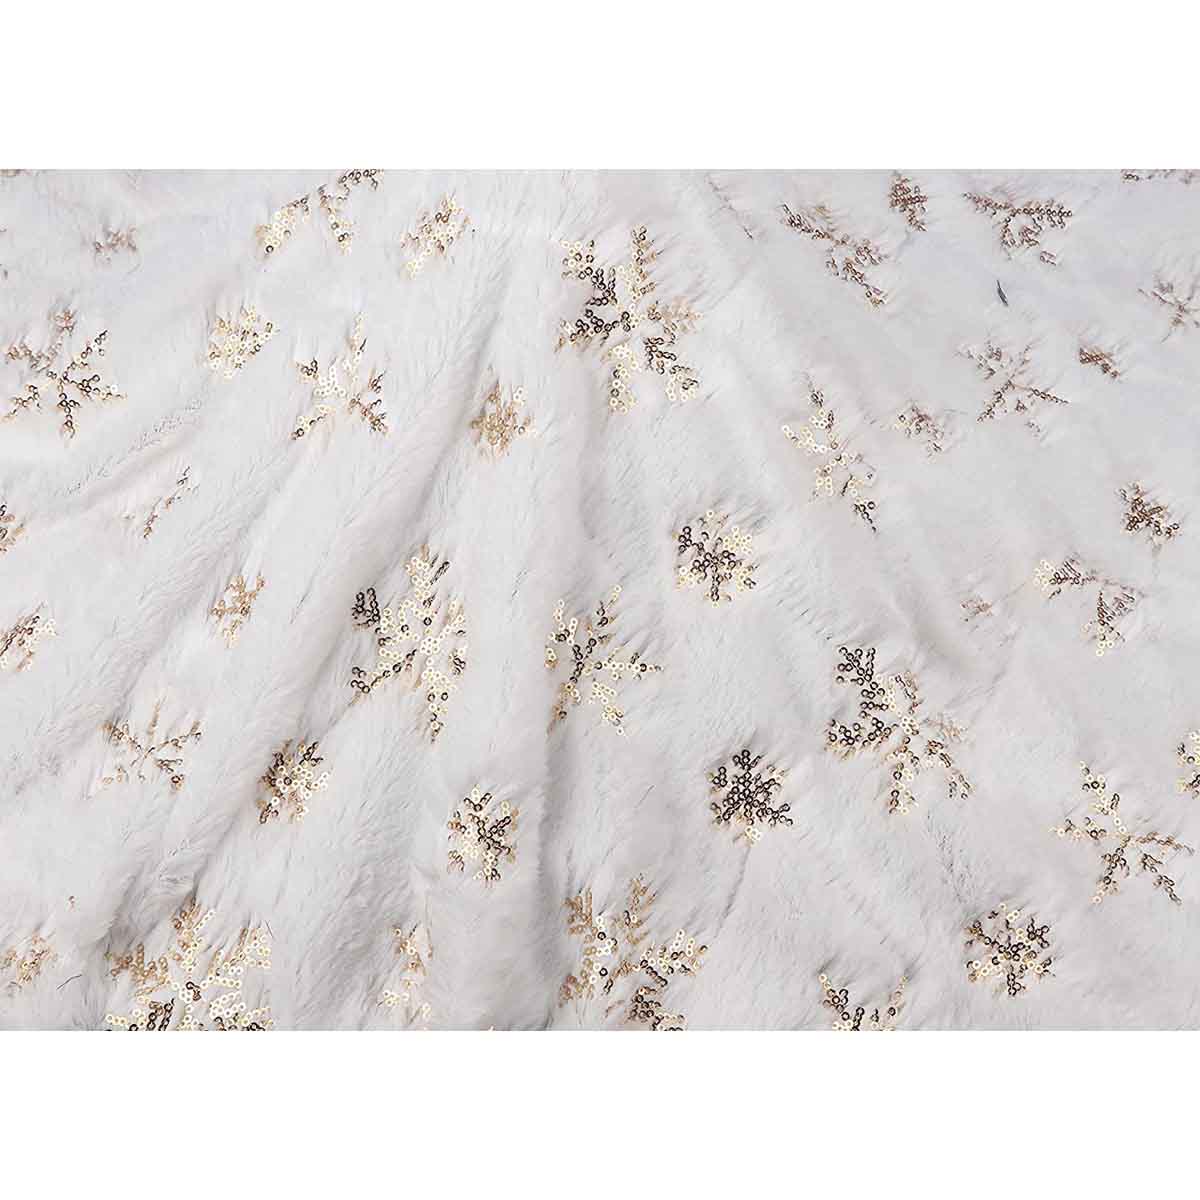 1 Yard Faux Fur Fabric with Sequin Snowflake by The Yard,62″ Wide